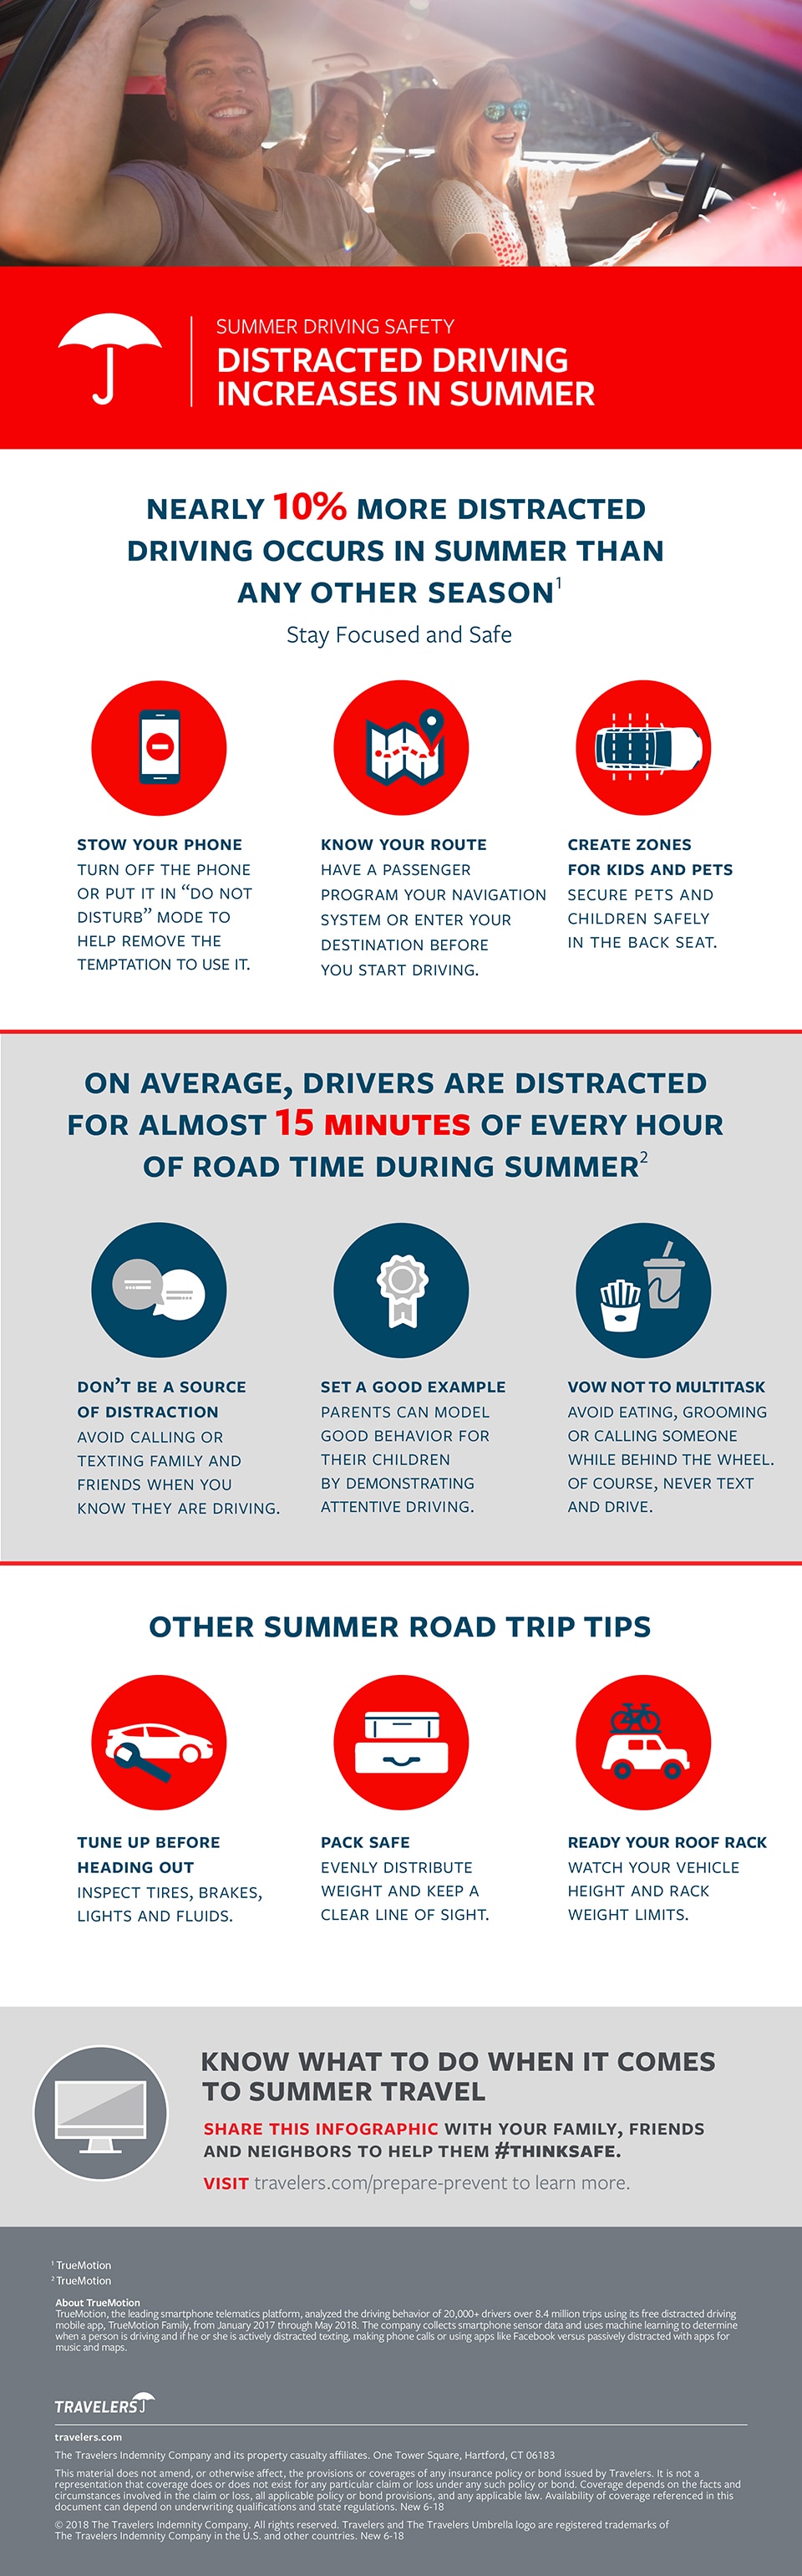 Summer travel safety tips